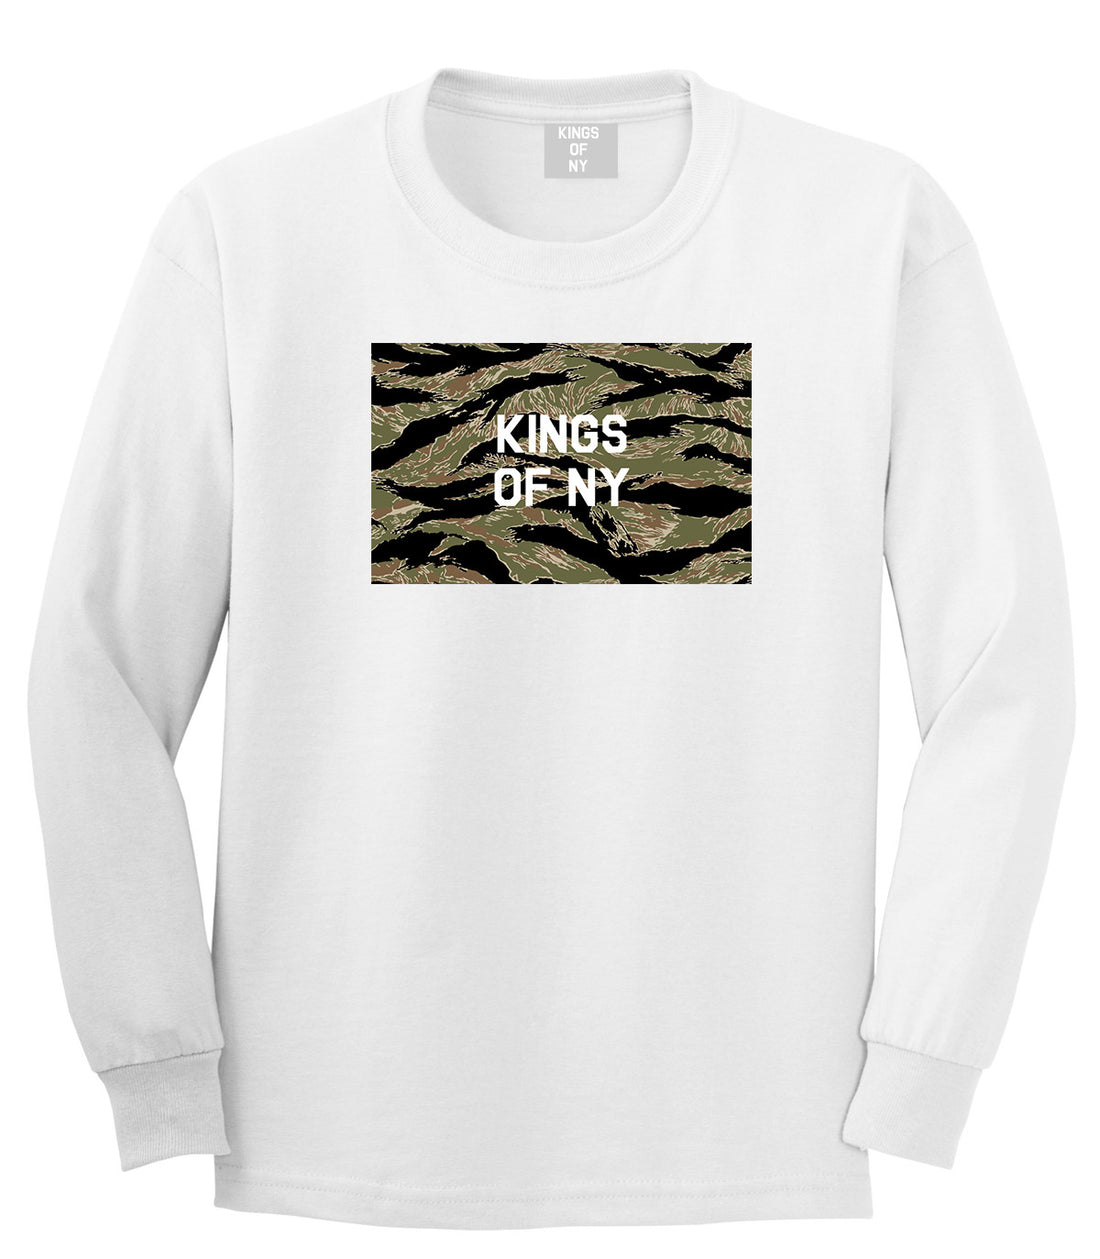 Tiger Stripe Camo Army Long Sleeve T-Shirt in White